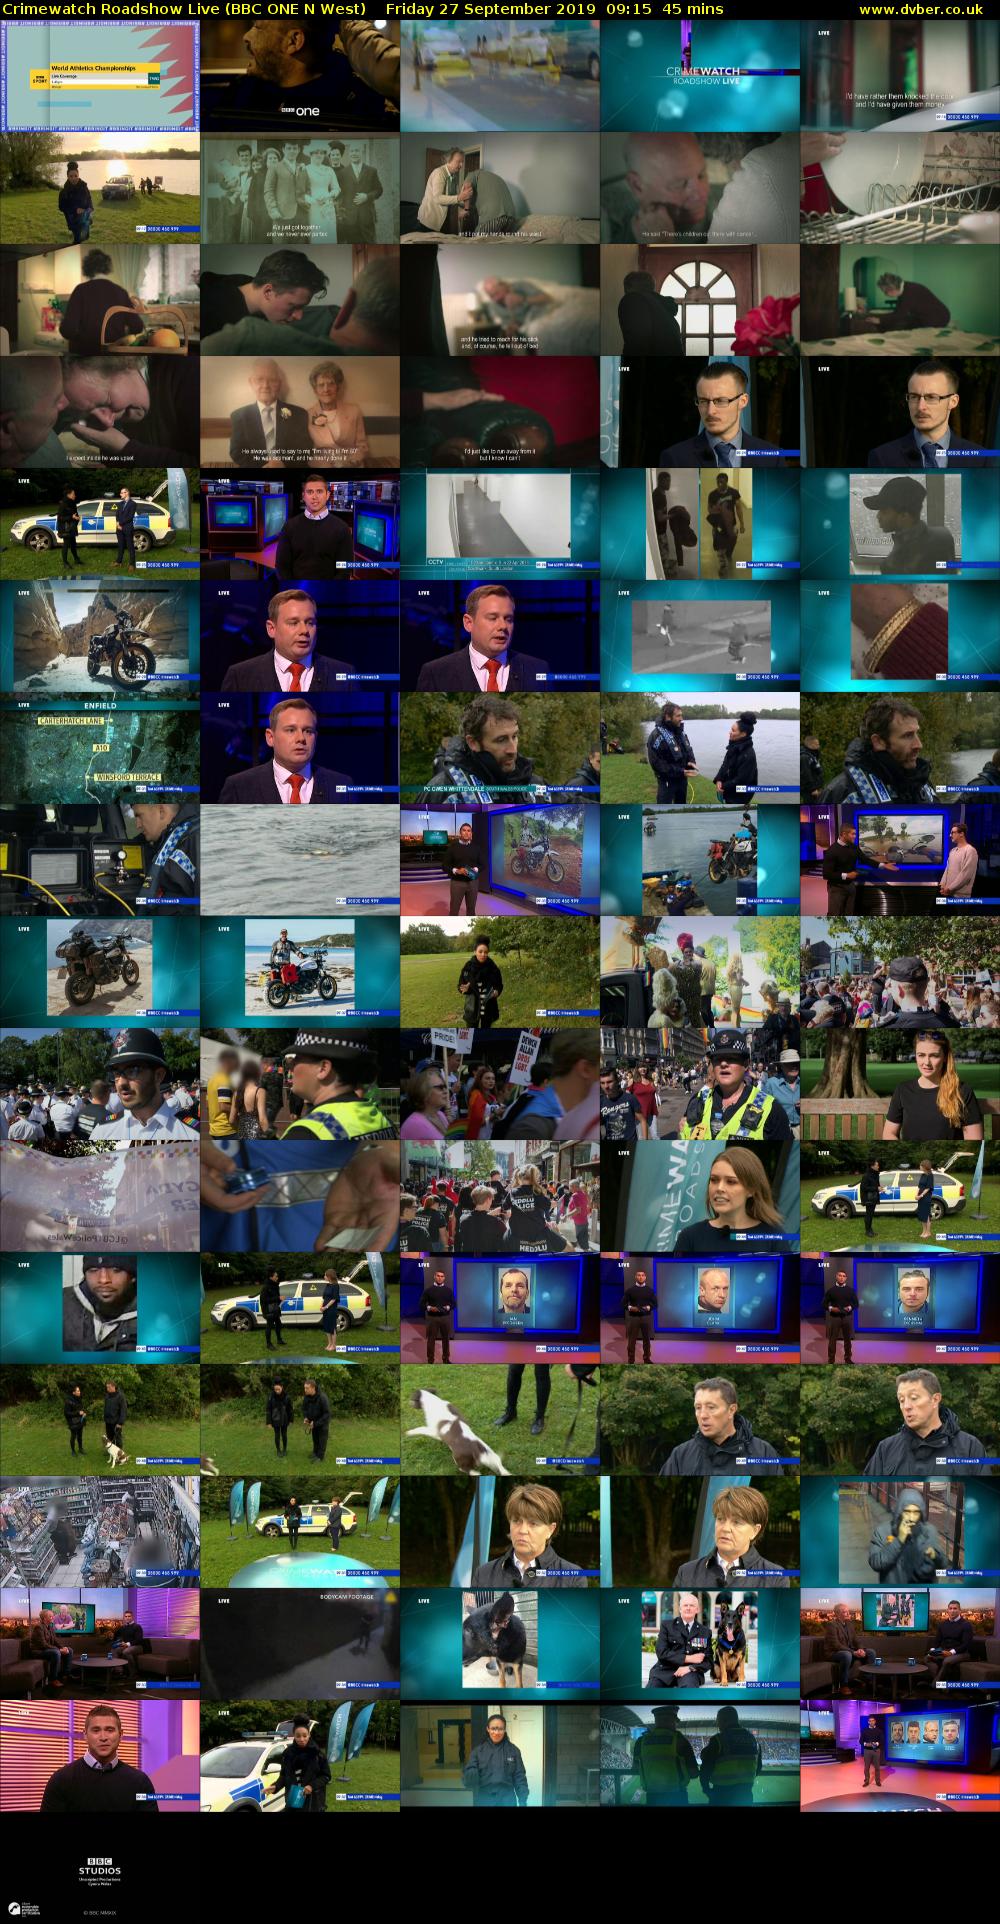 Crimewatch Roadshow Live (BBC ONE N West) Friday 27 September 2019 09:15 - 10:00